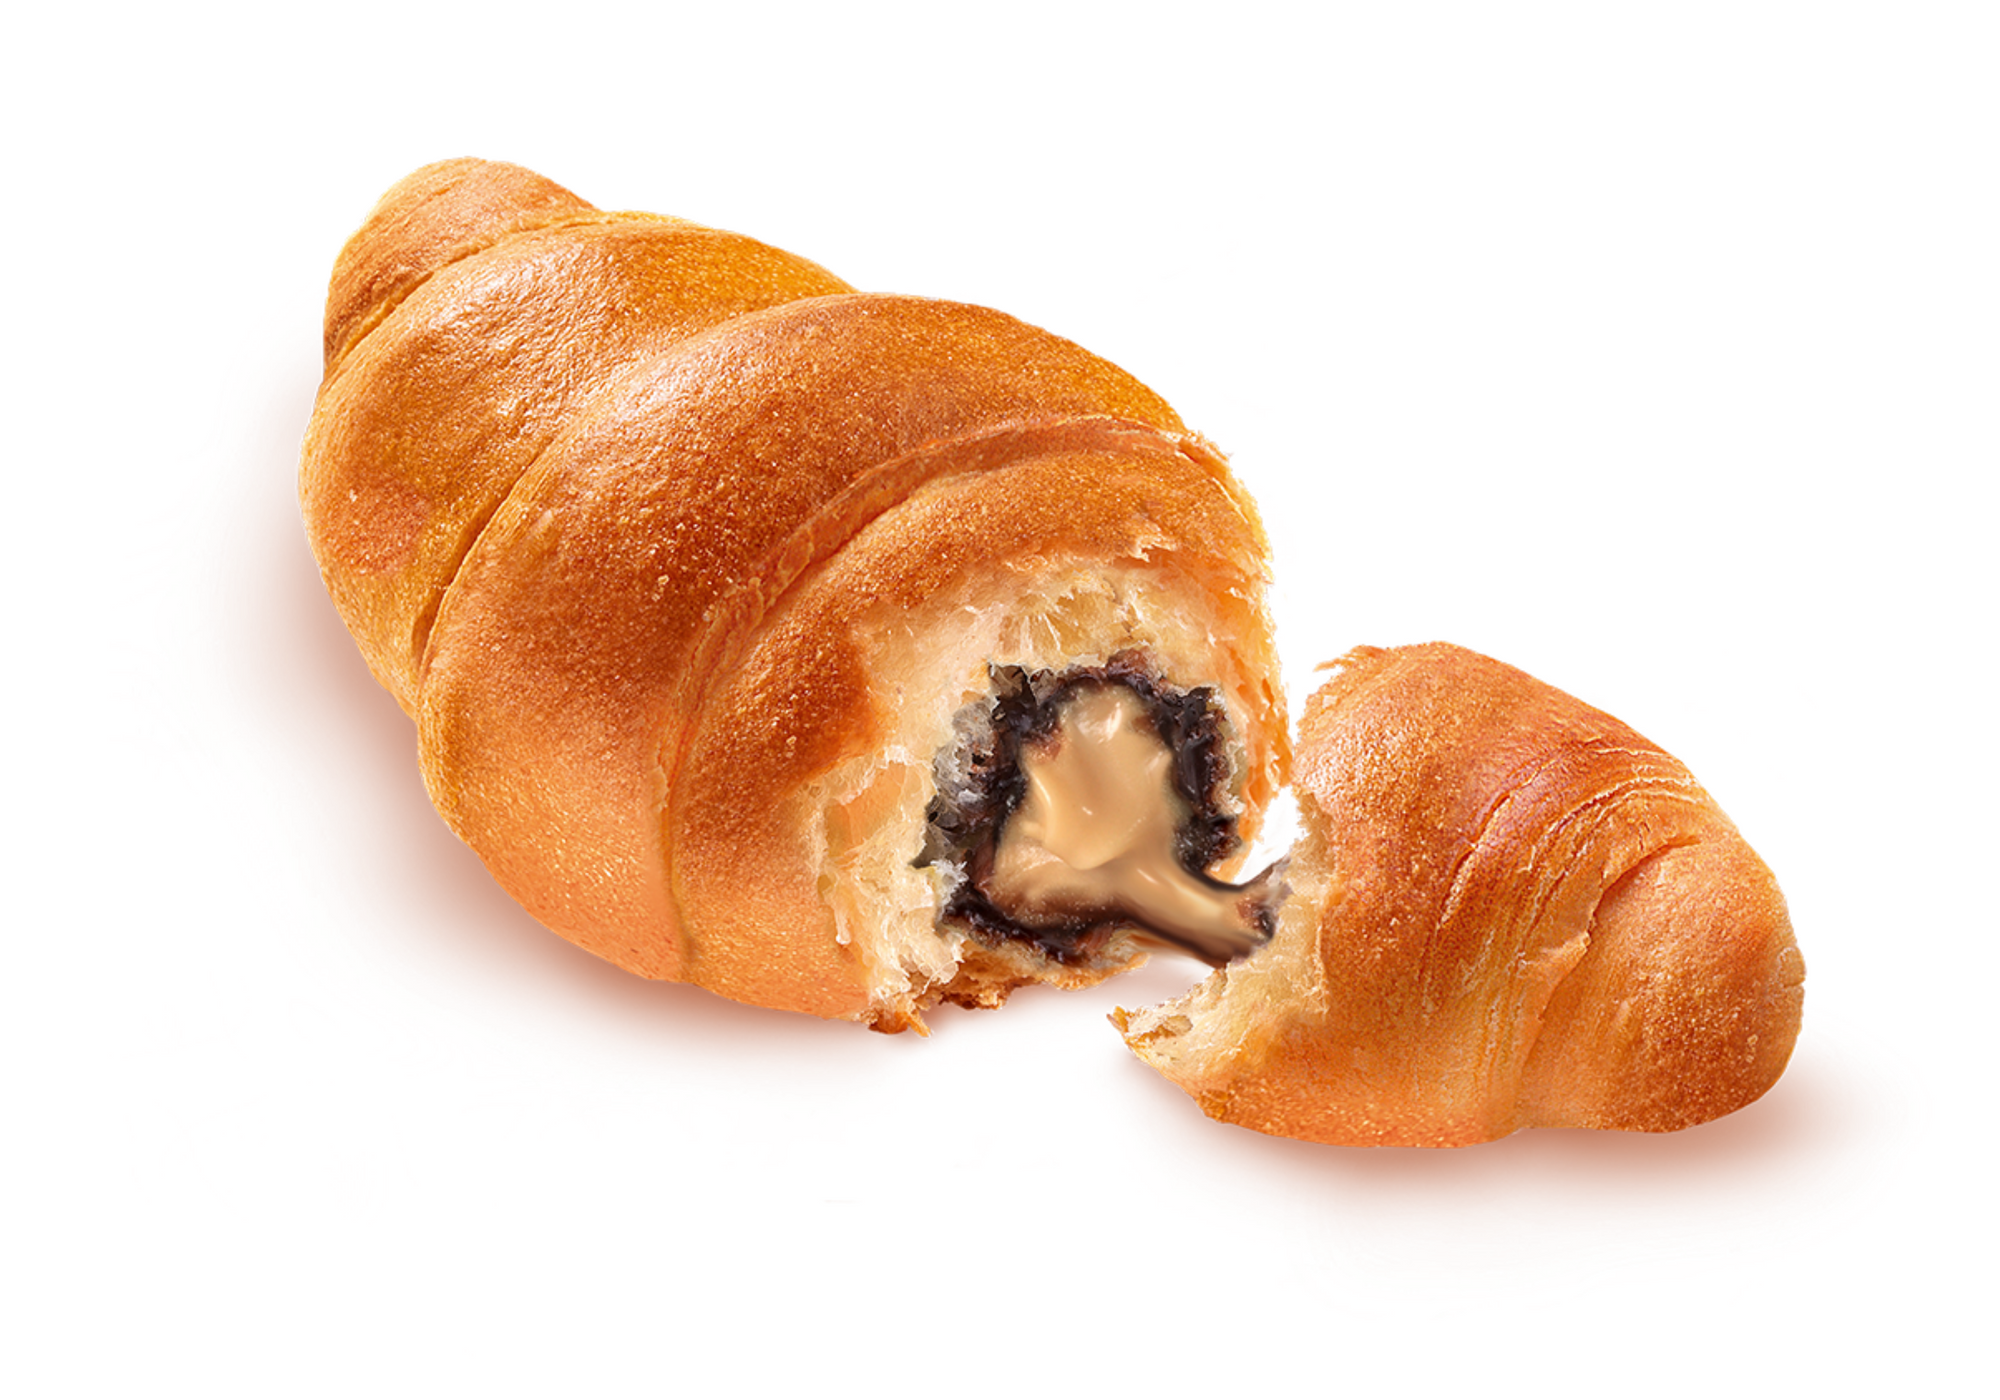 peanut butter chocolate croissant in packaging